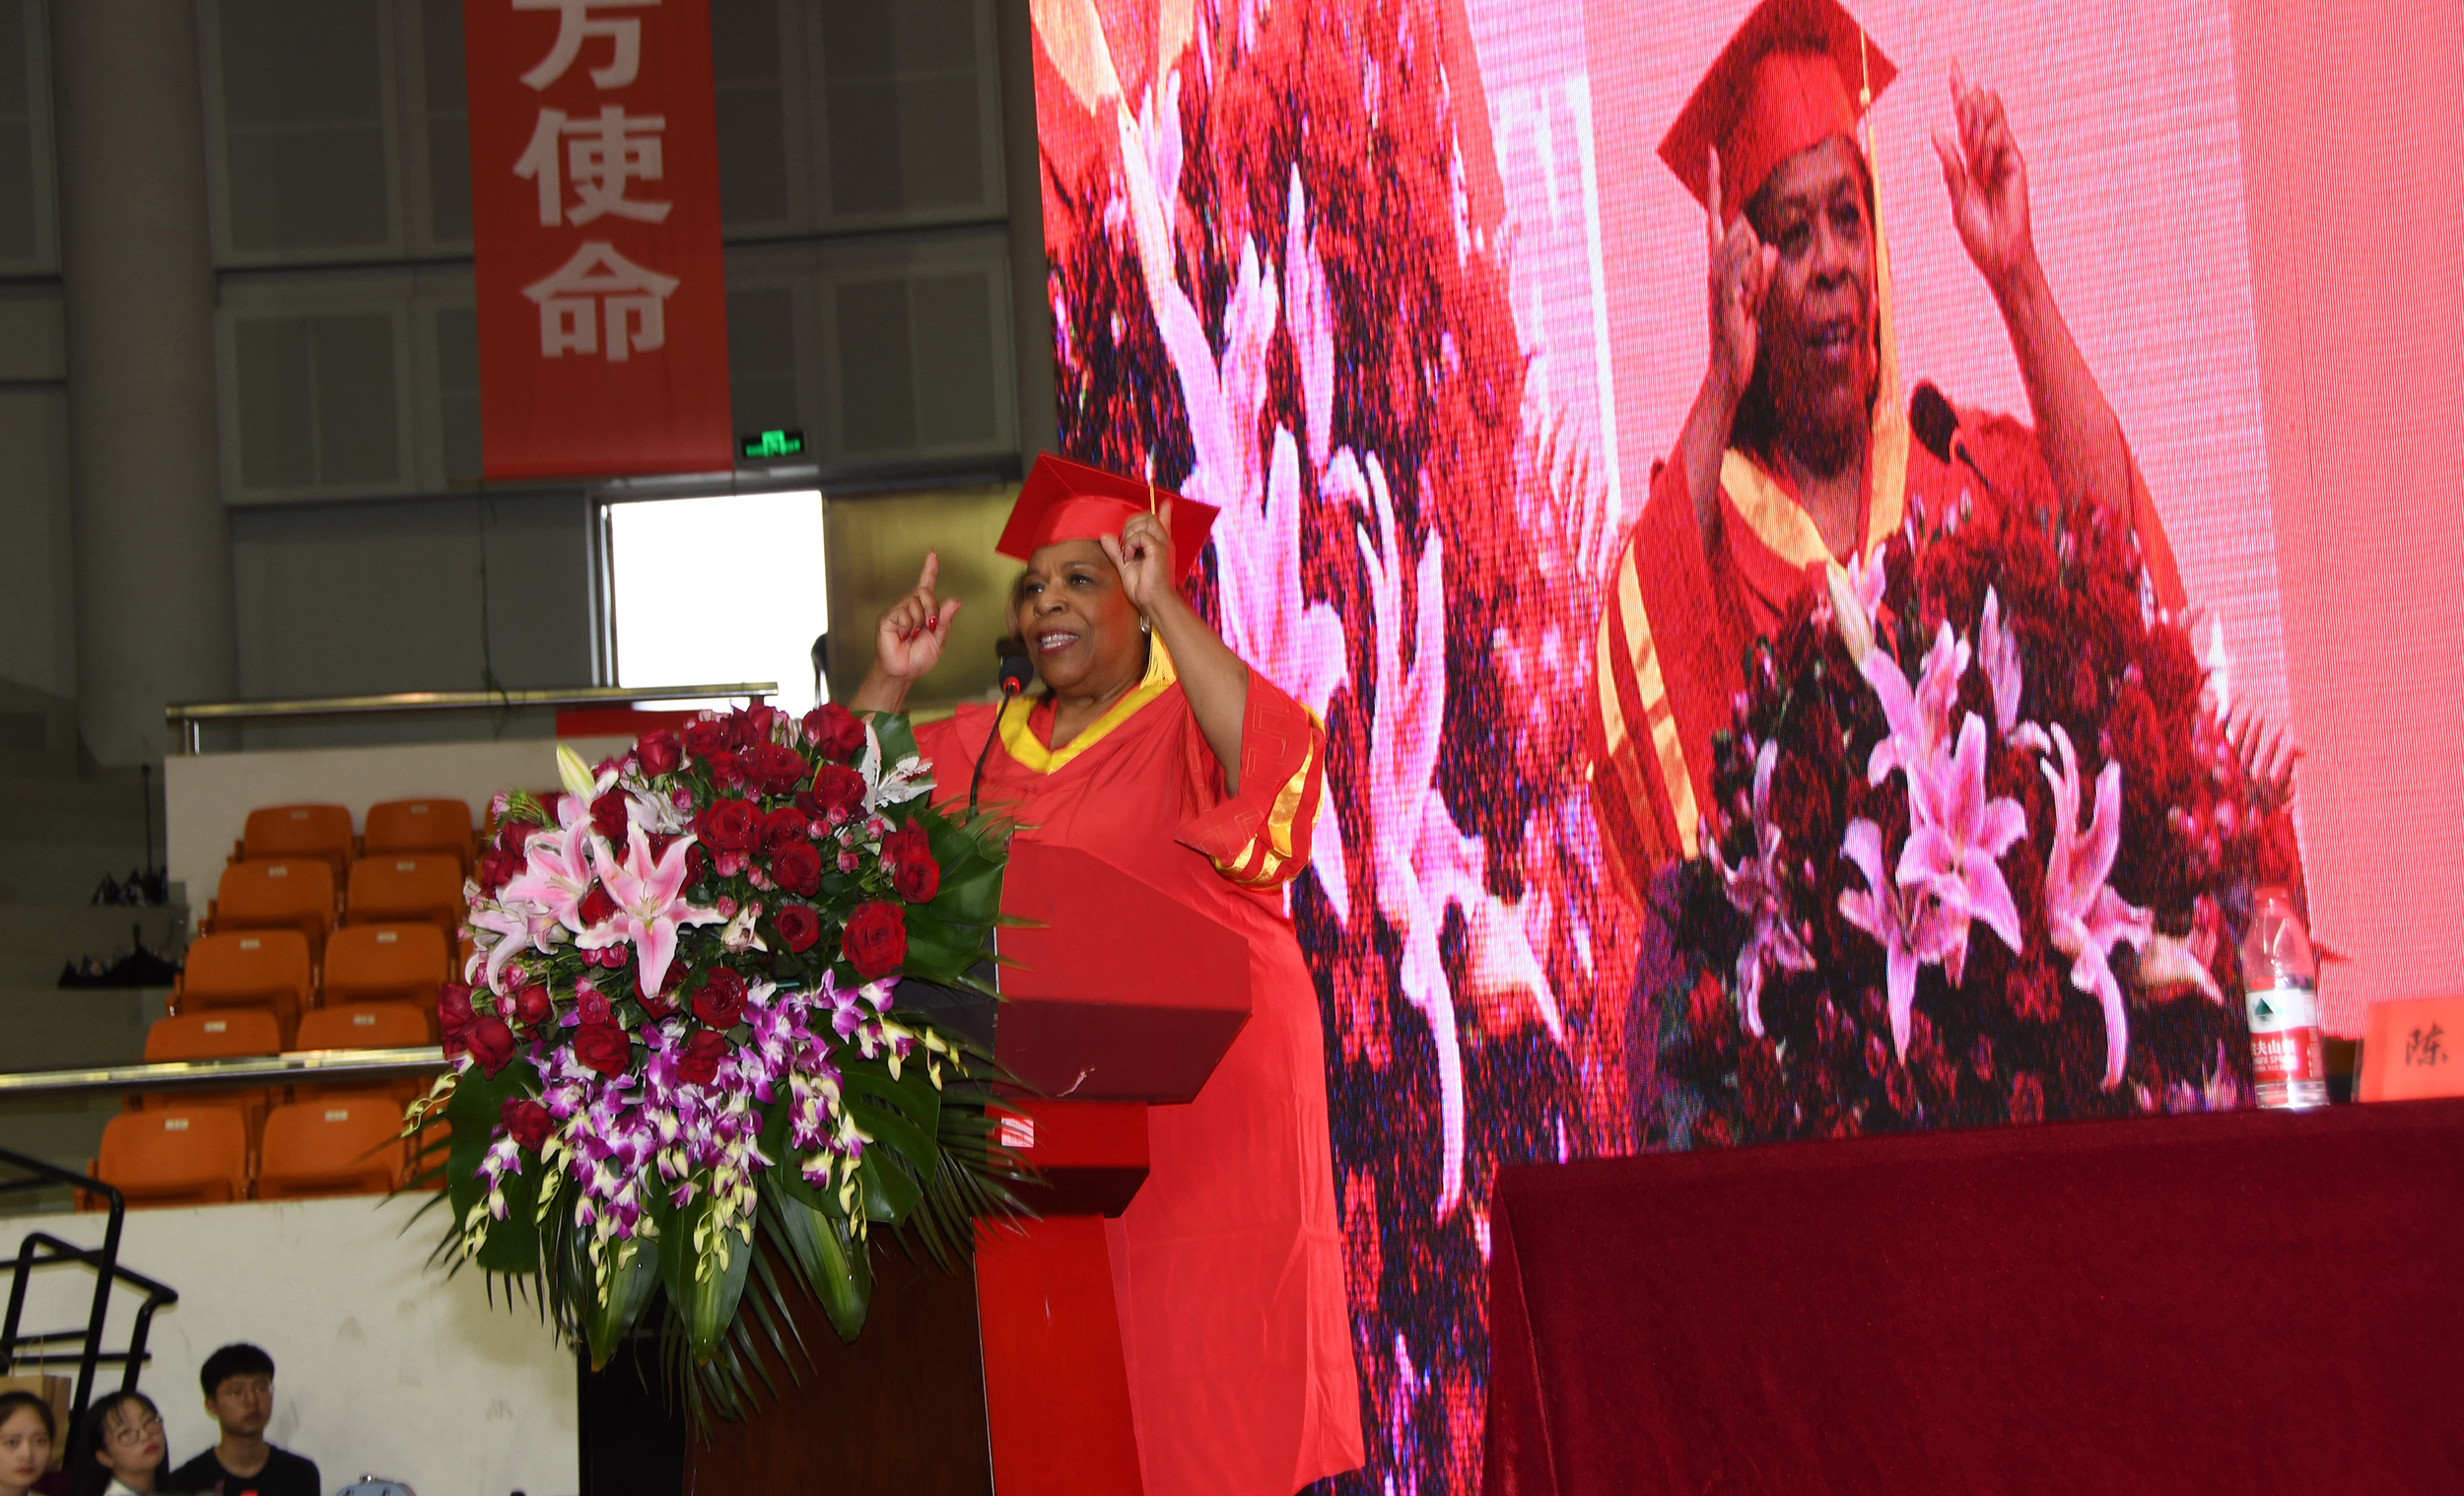 Dr. Wilma Mishoe gives her Commencement address while a larger-than-life image of her lights up the stage behind her.